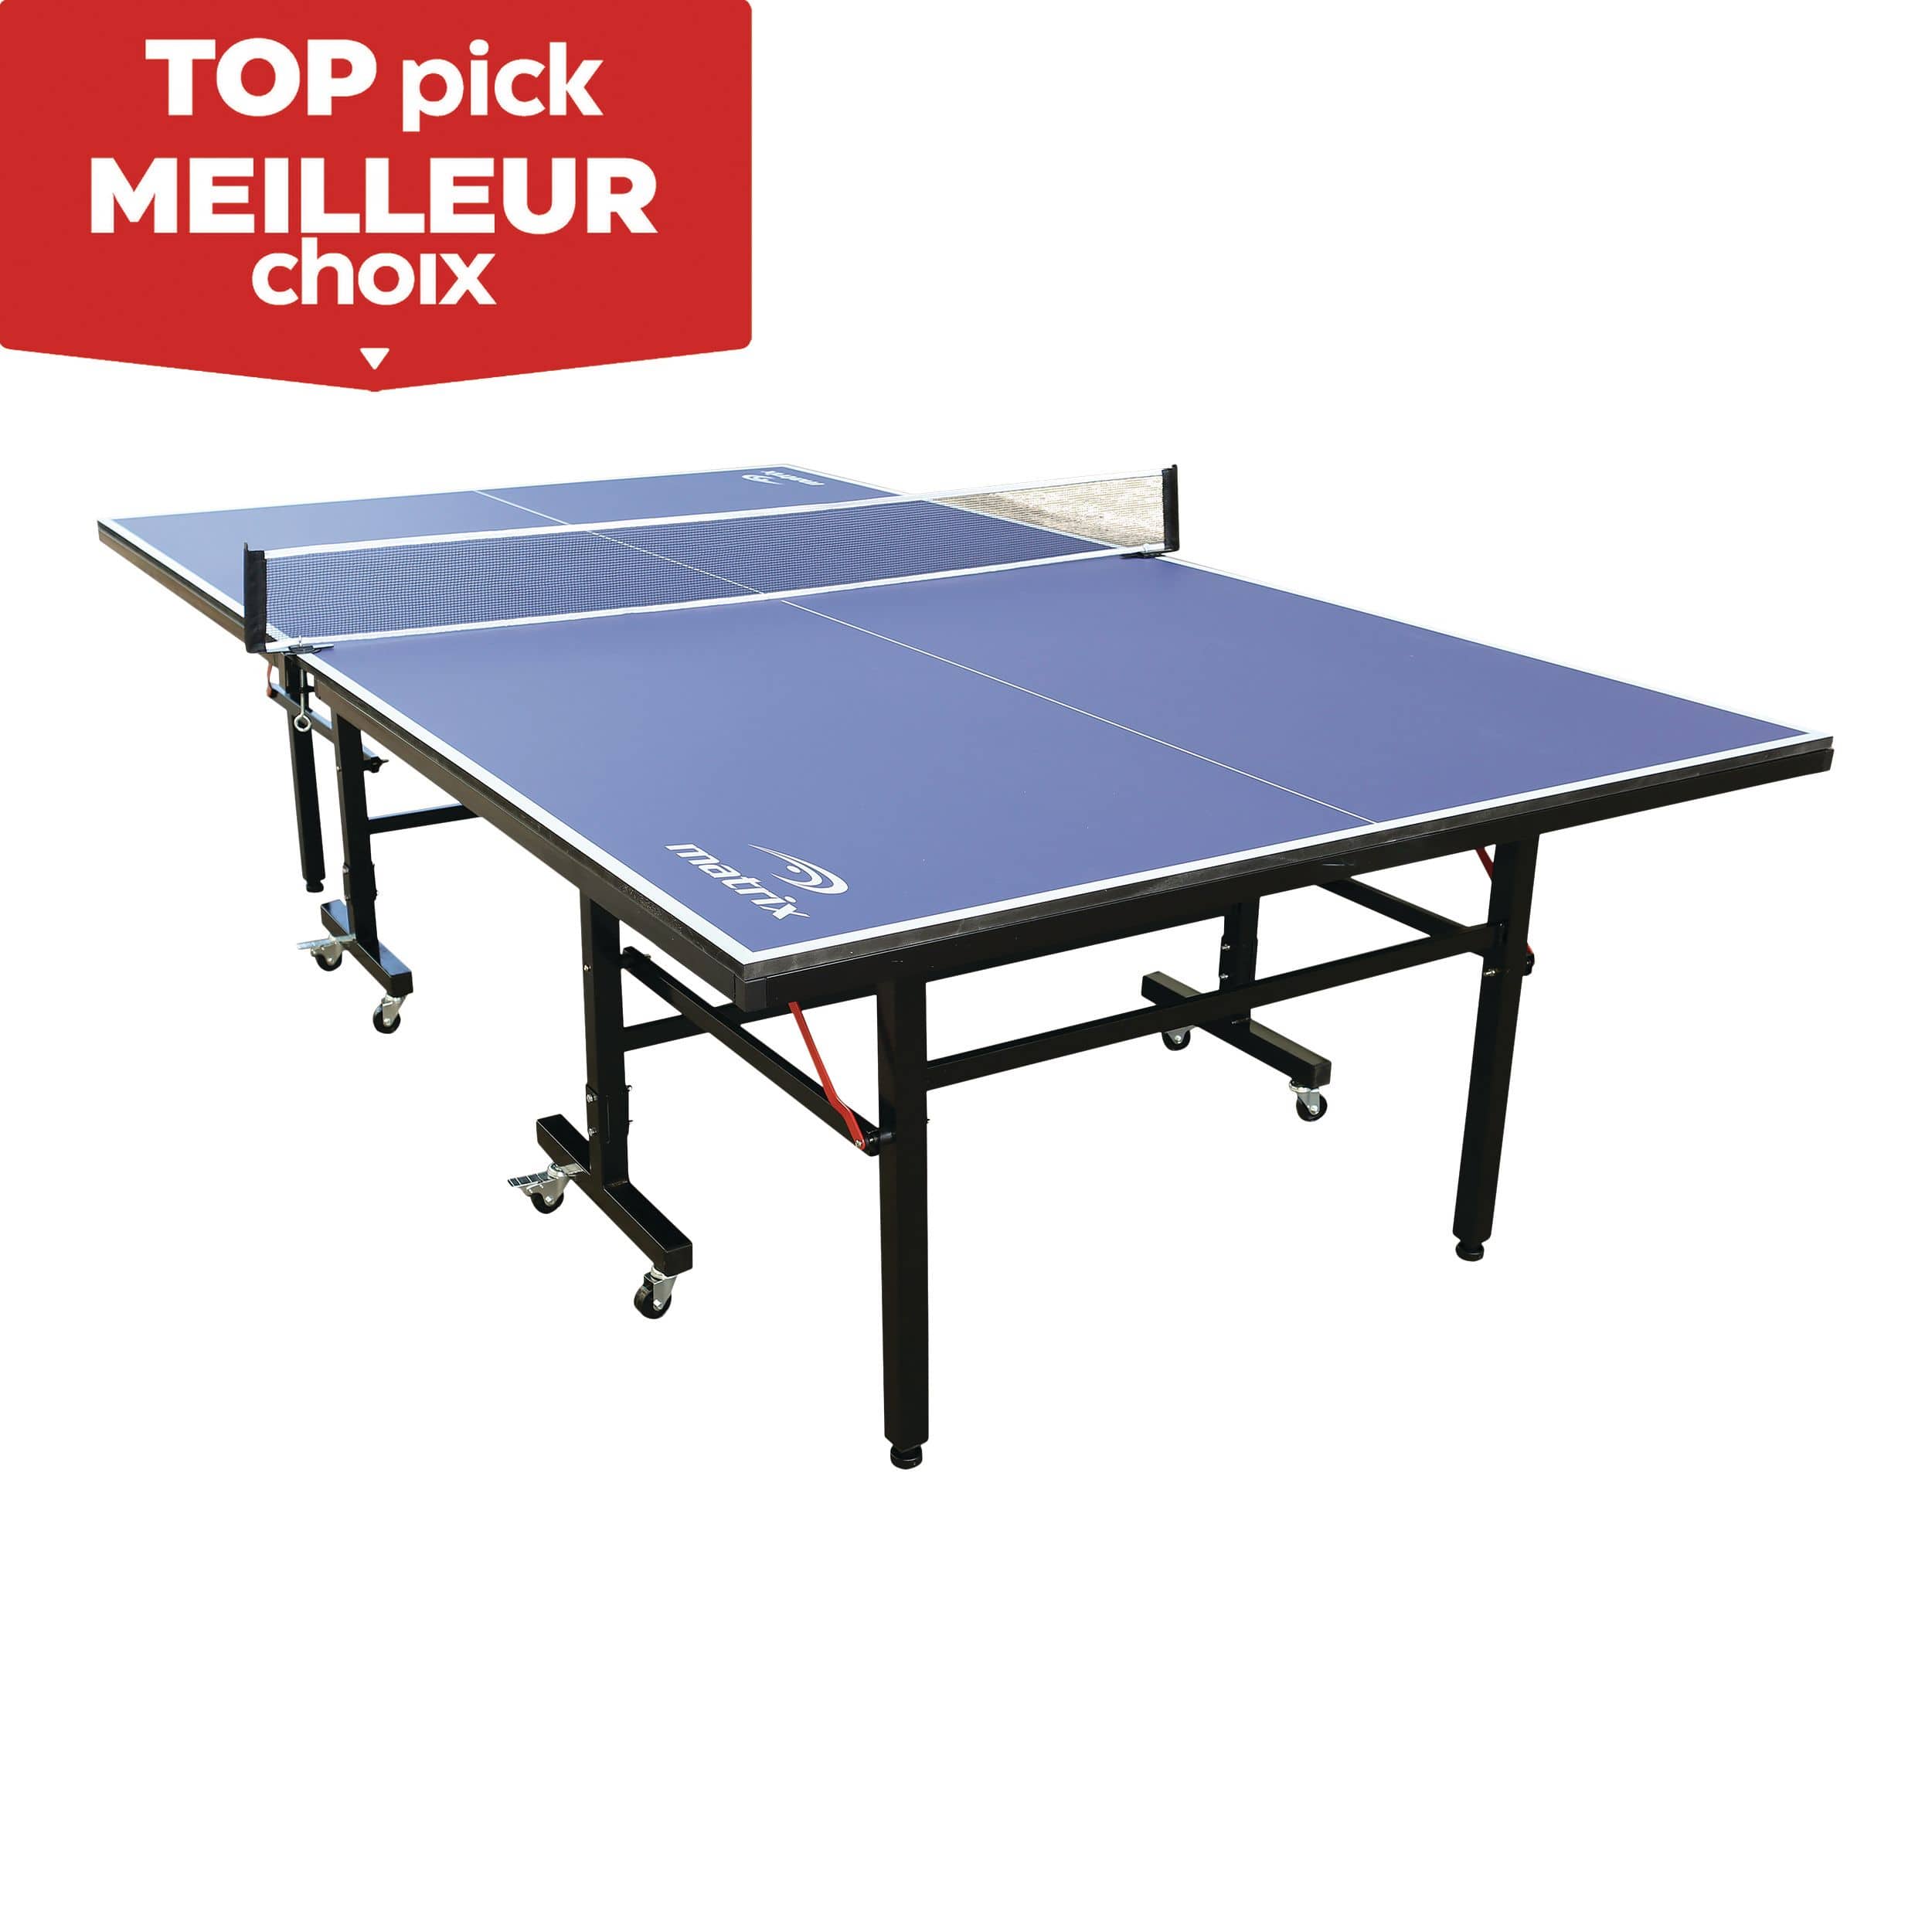 https://media-www.canadiantire.ca/product/playing/team-sports-and-golf/indoor-games/1840693/matrix-4000-table-tennis-table-cc5b6cc1-510d-4012-b771-65f5e68c3291-jpgrendition.jpg